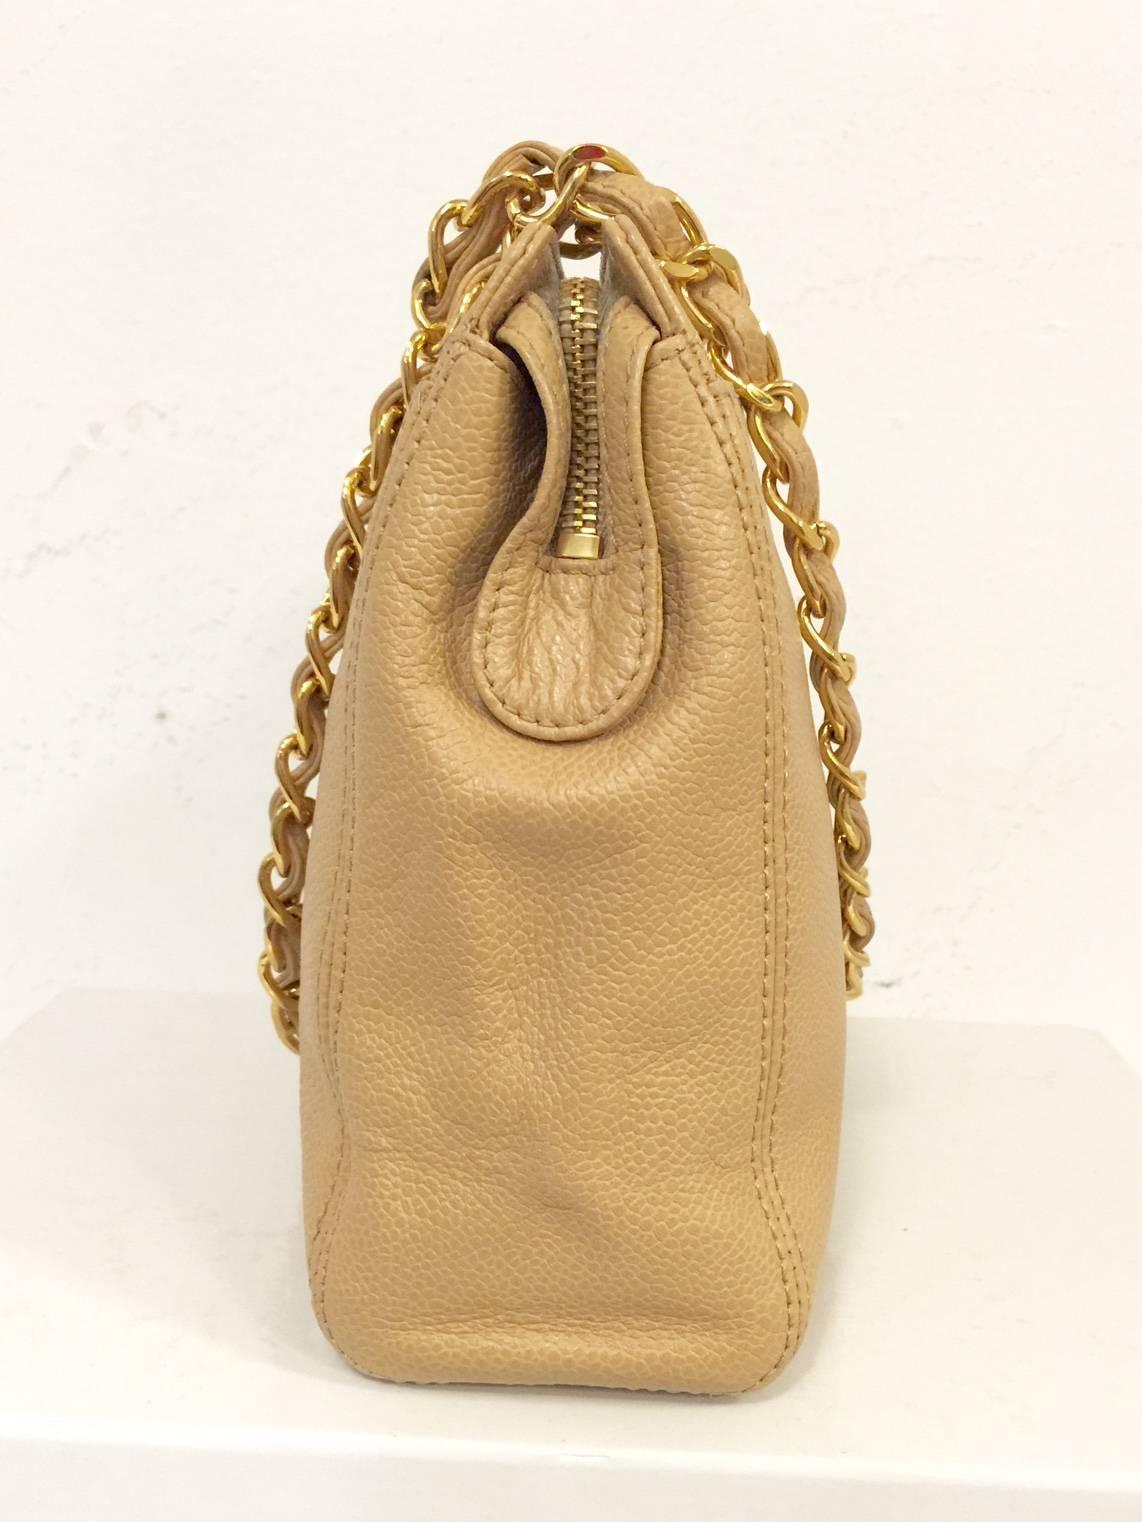 Chanel Tan Caviar Leather Shoulder Bag/Double Leather Woven Chain Straps 2